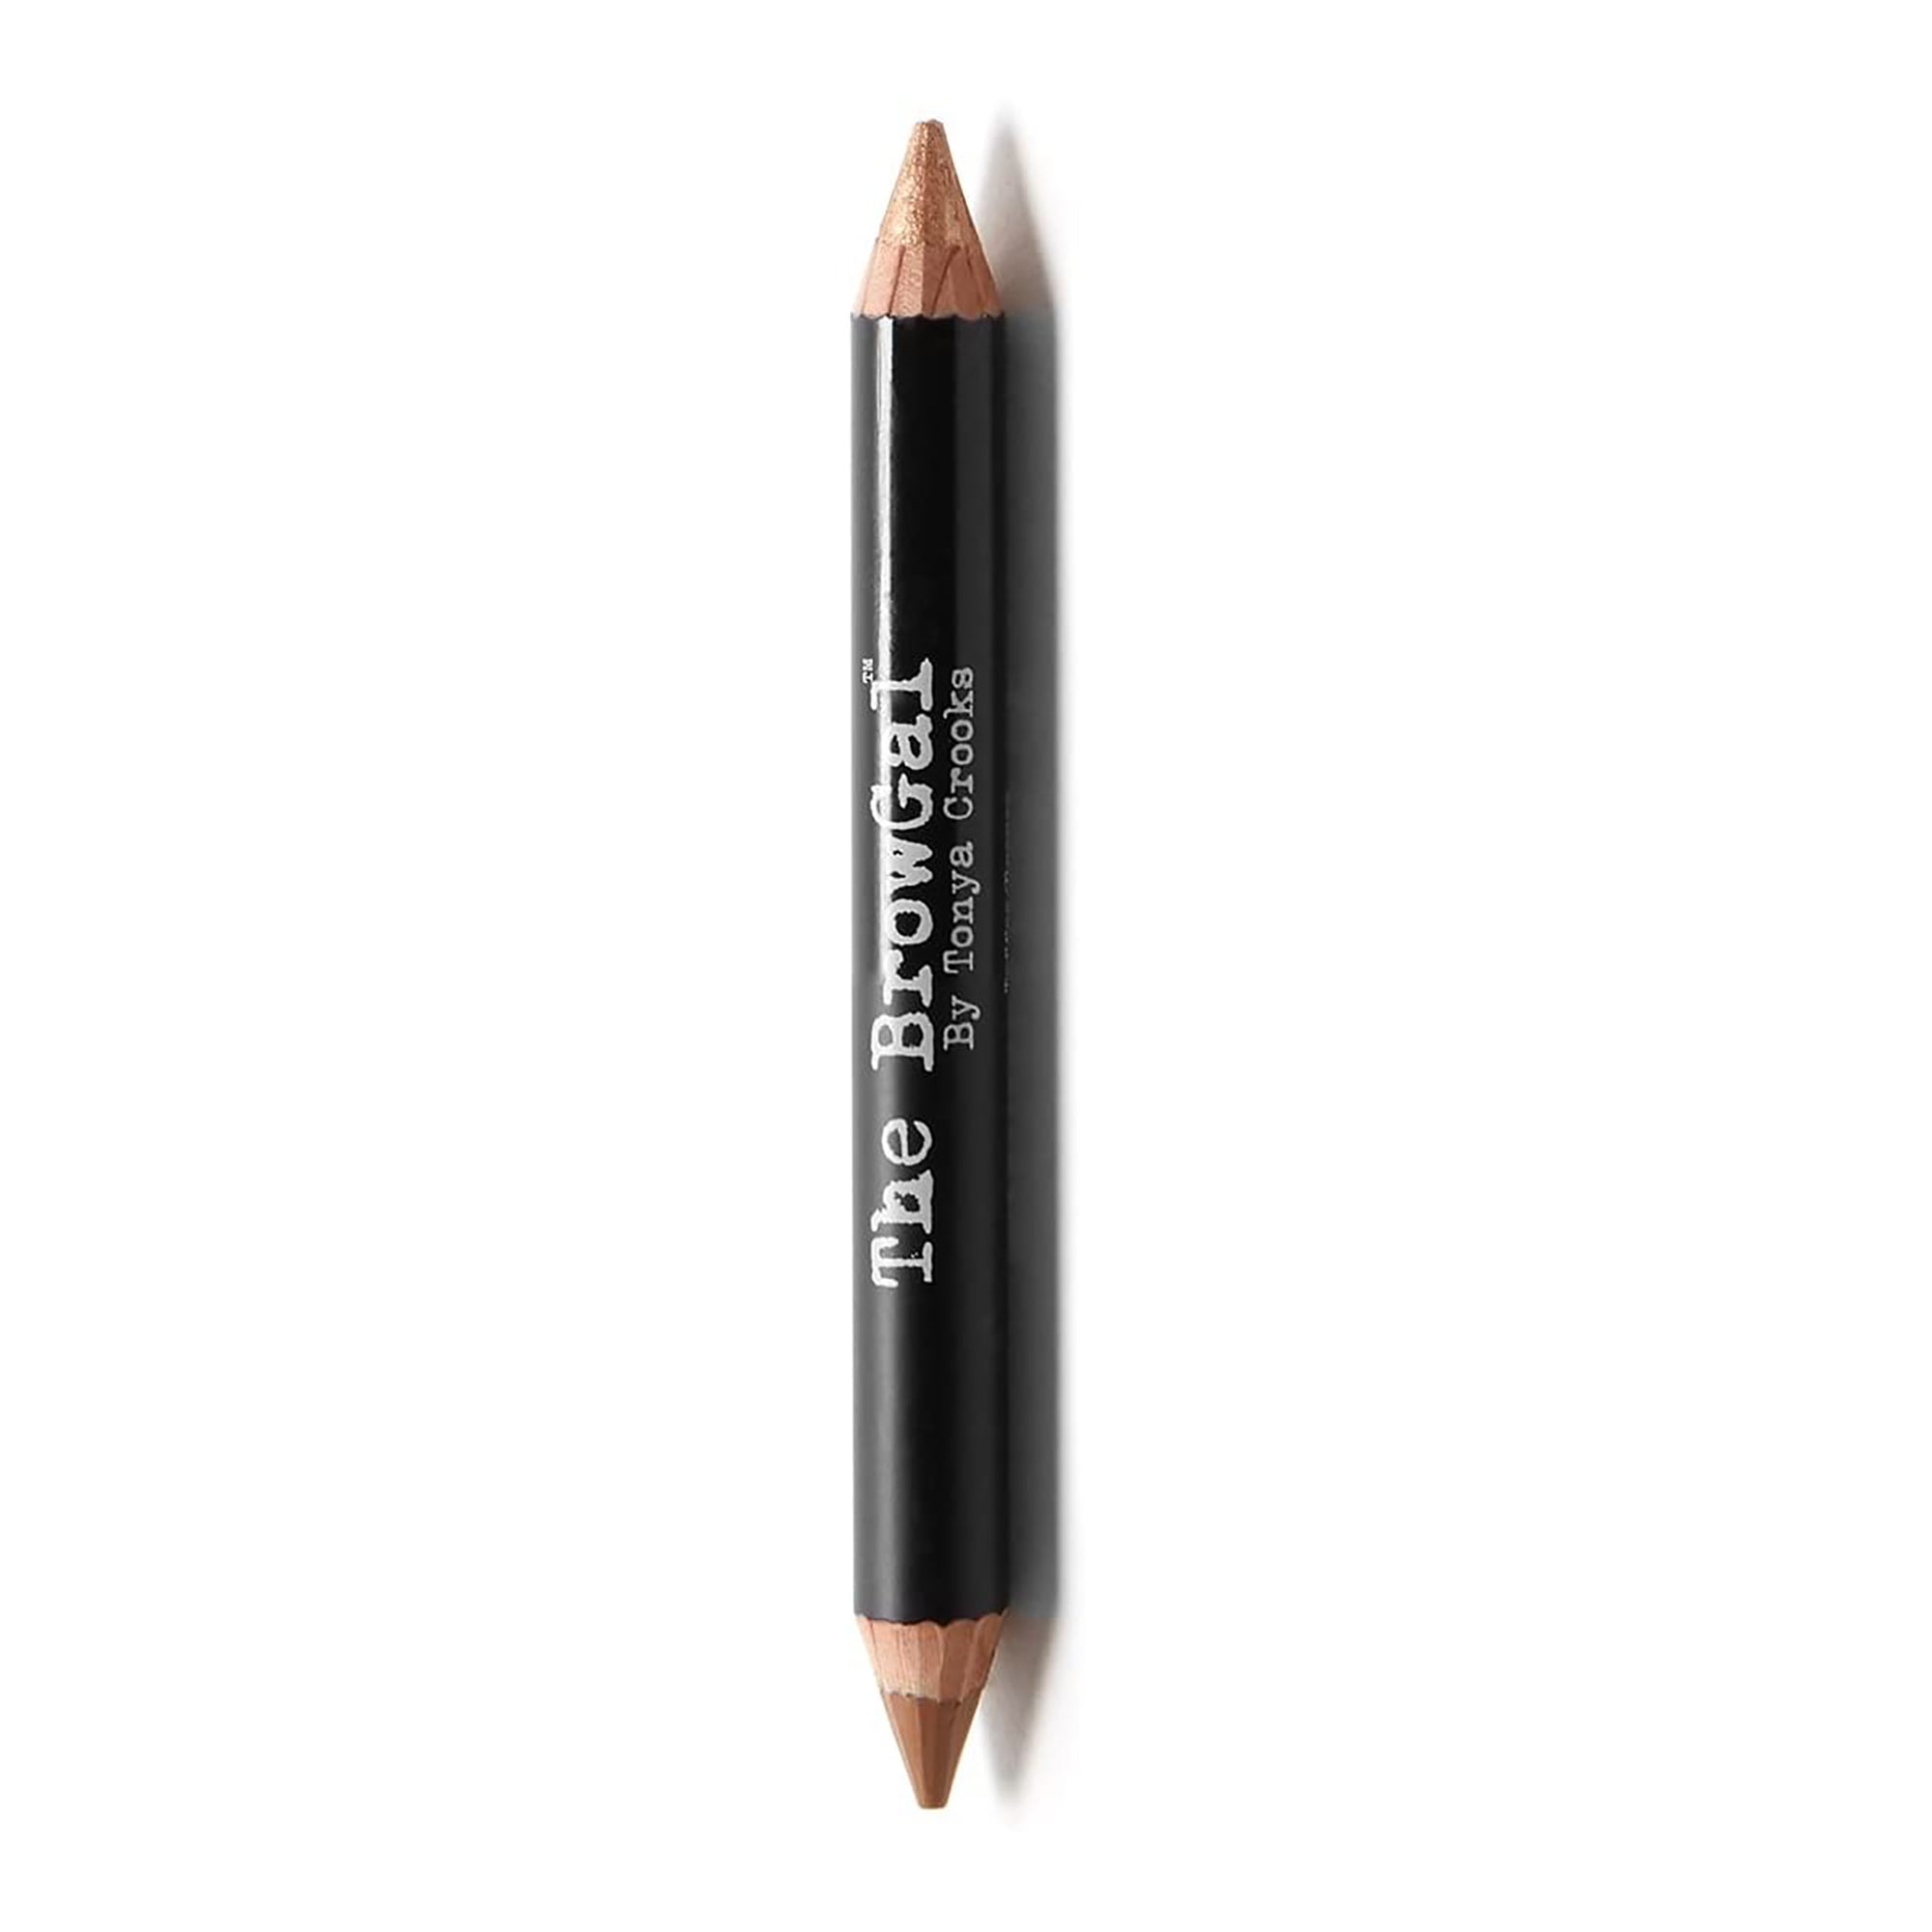 The BrowGal Highlighter Pencil -03 Toffee/Bronze